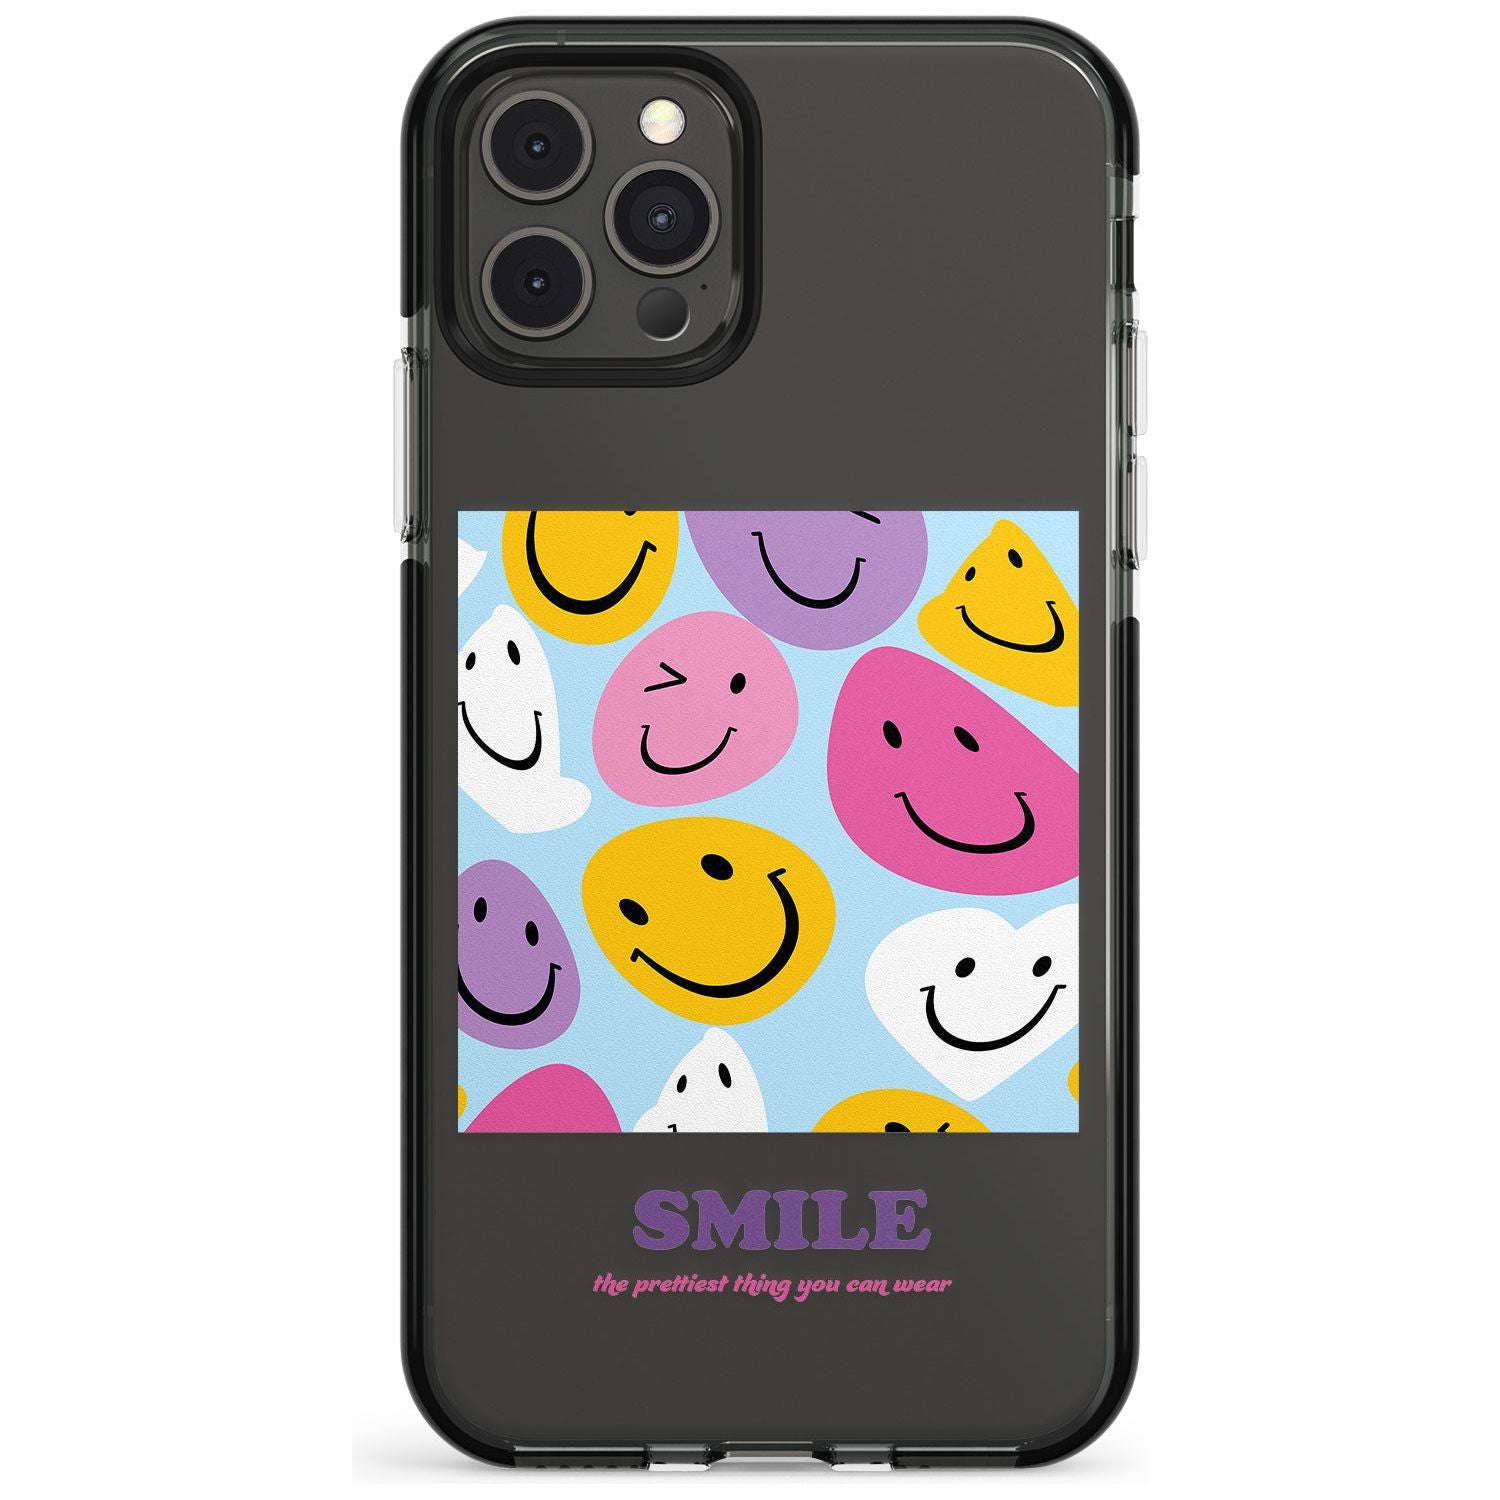 A Smile Black Impact Phone Case for iPhone 11